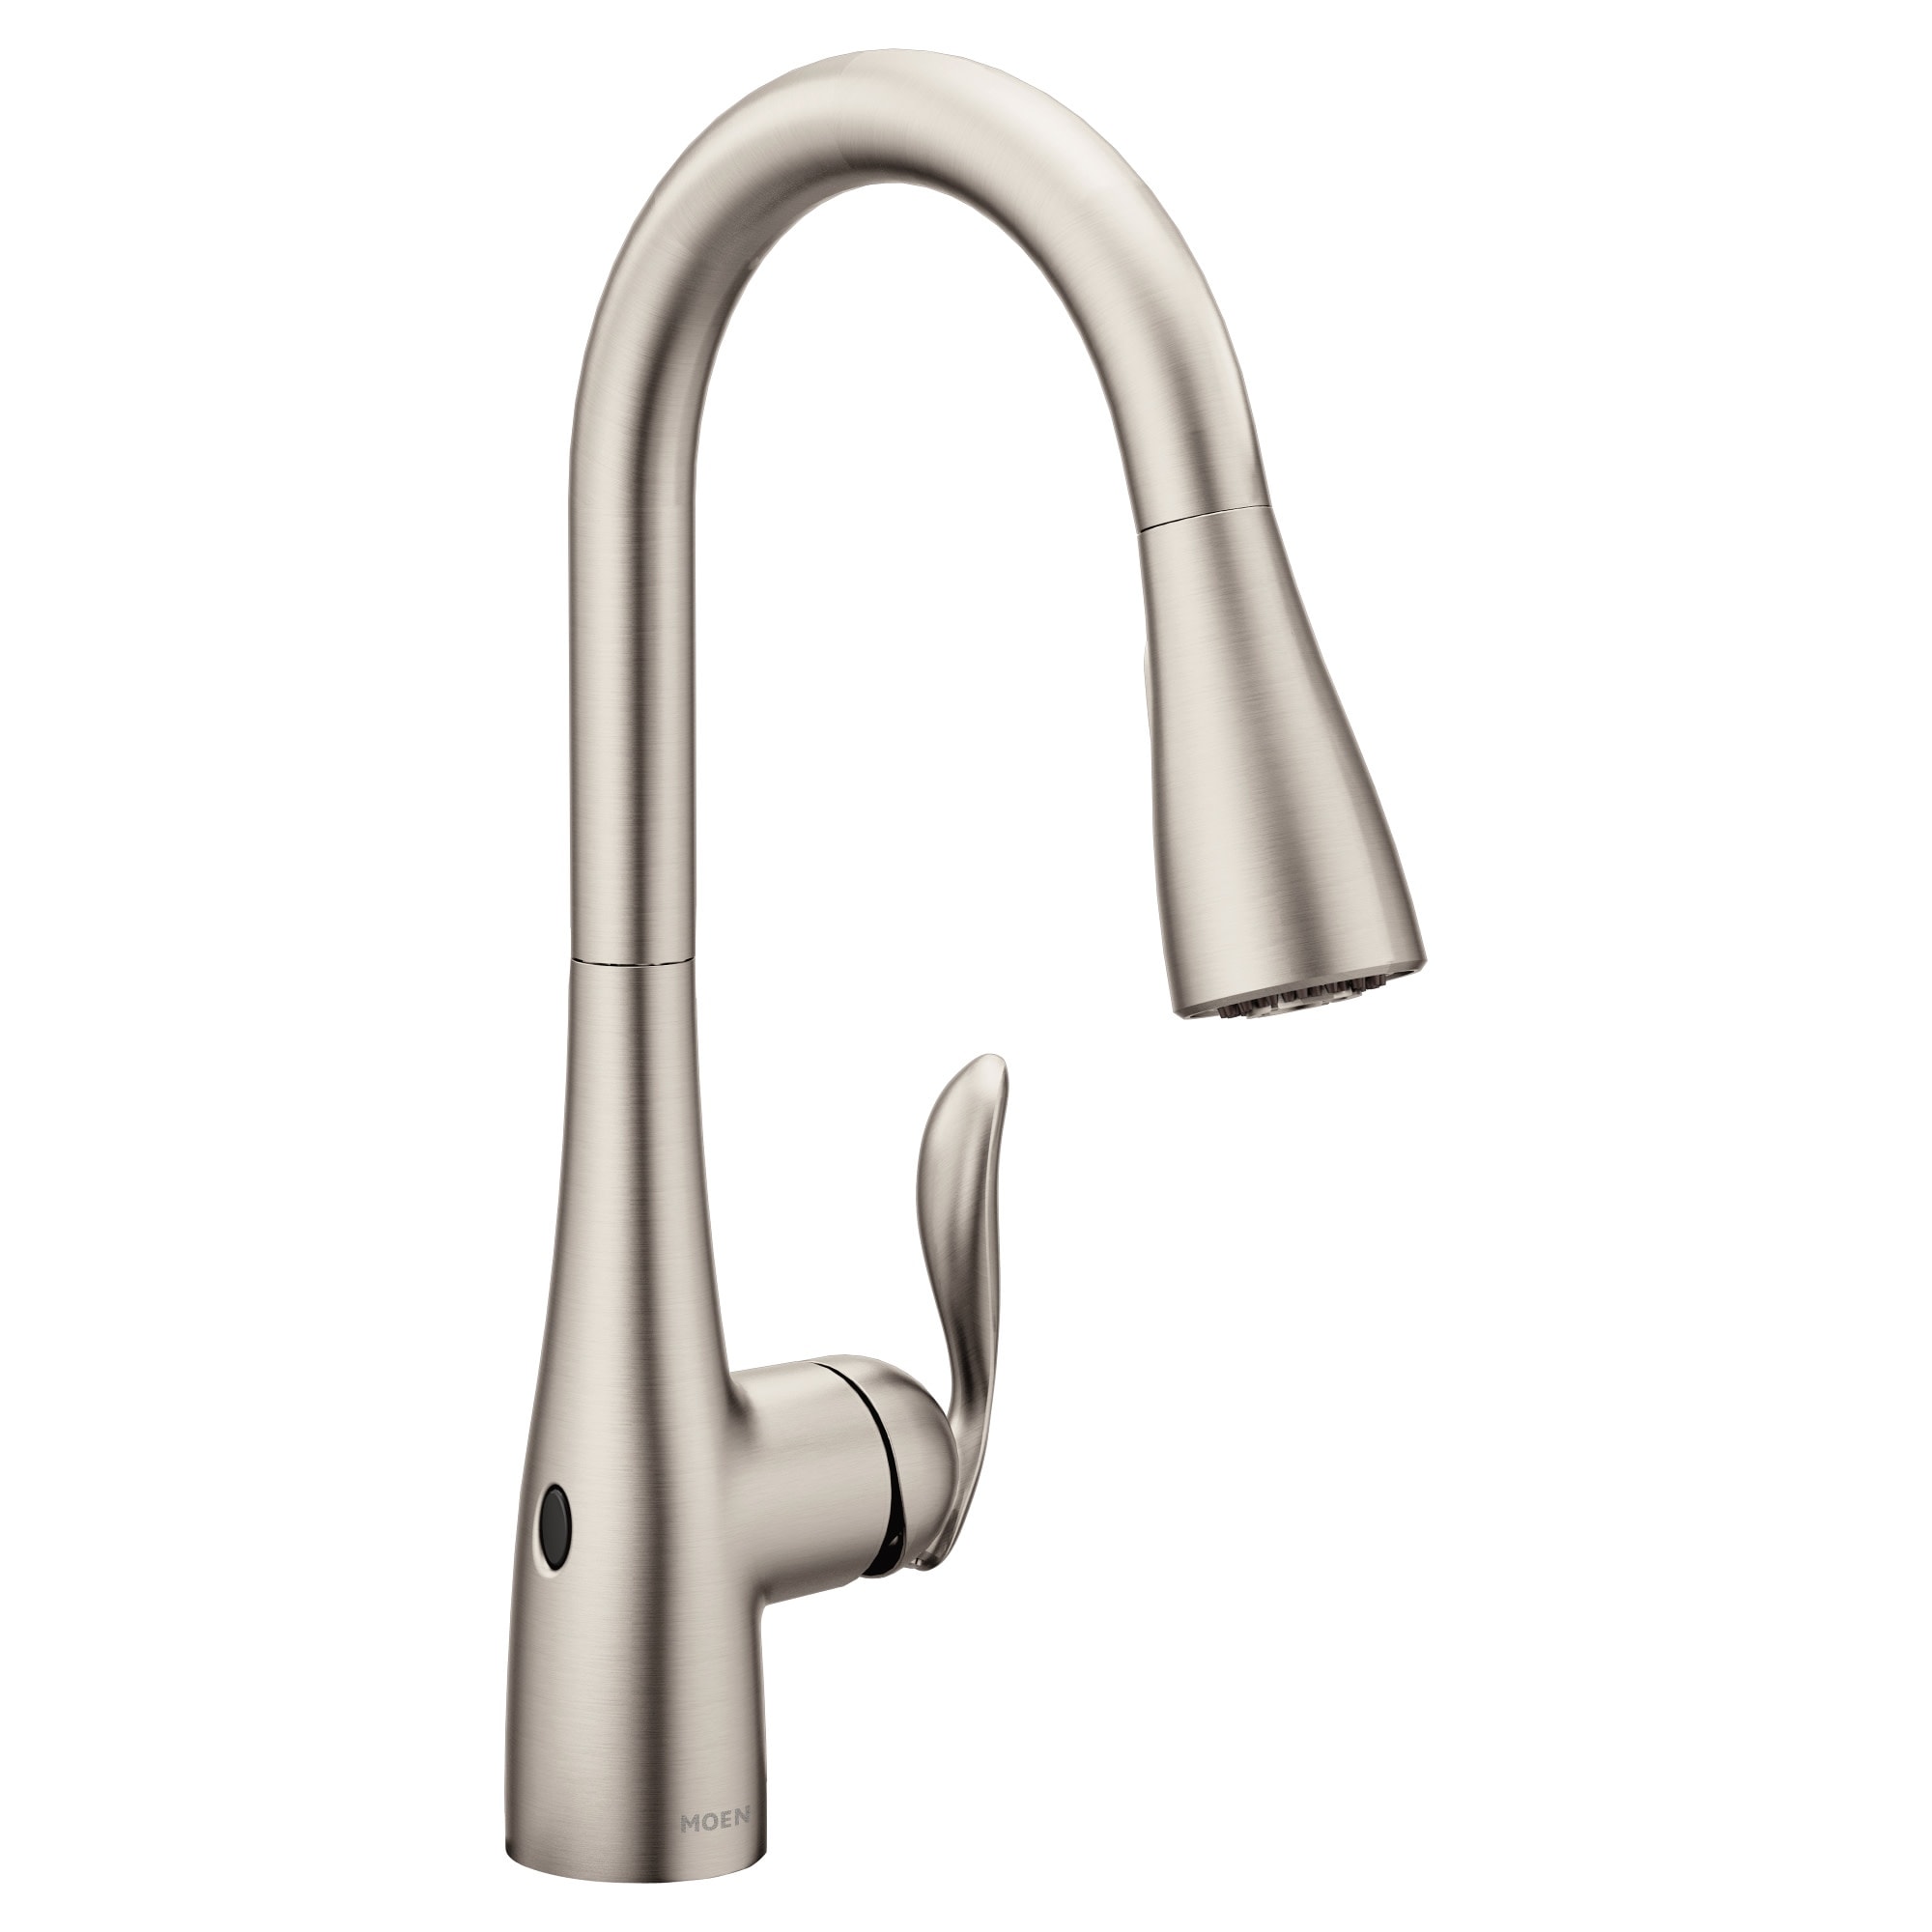 Moen 7594ew Arbor Pull Down High Arc Kitchen Faucet With Motionsense